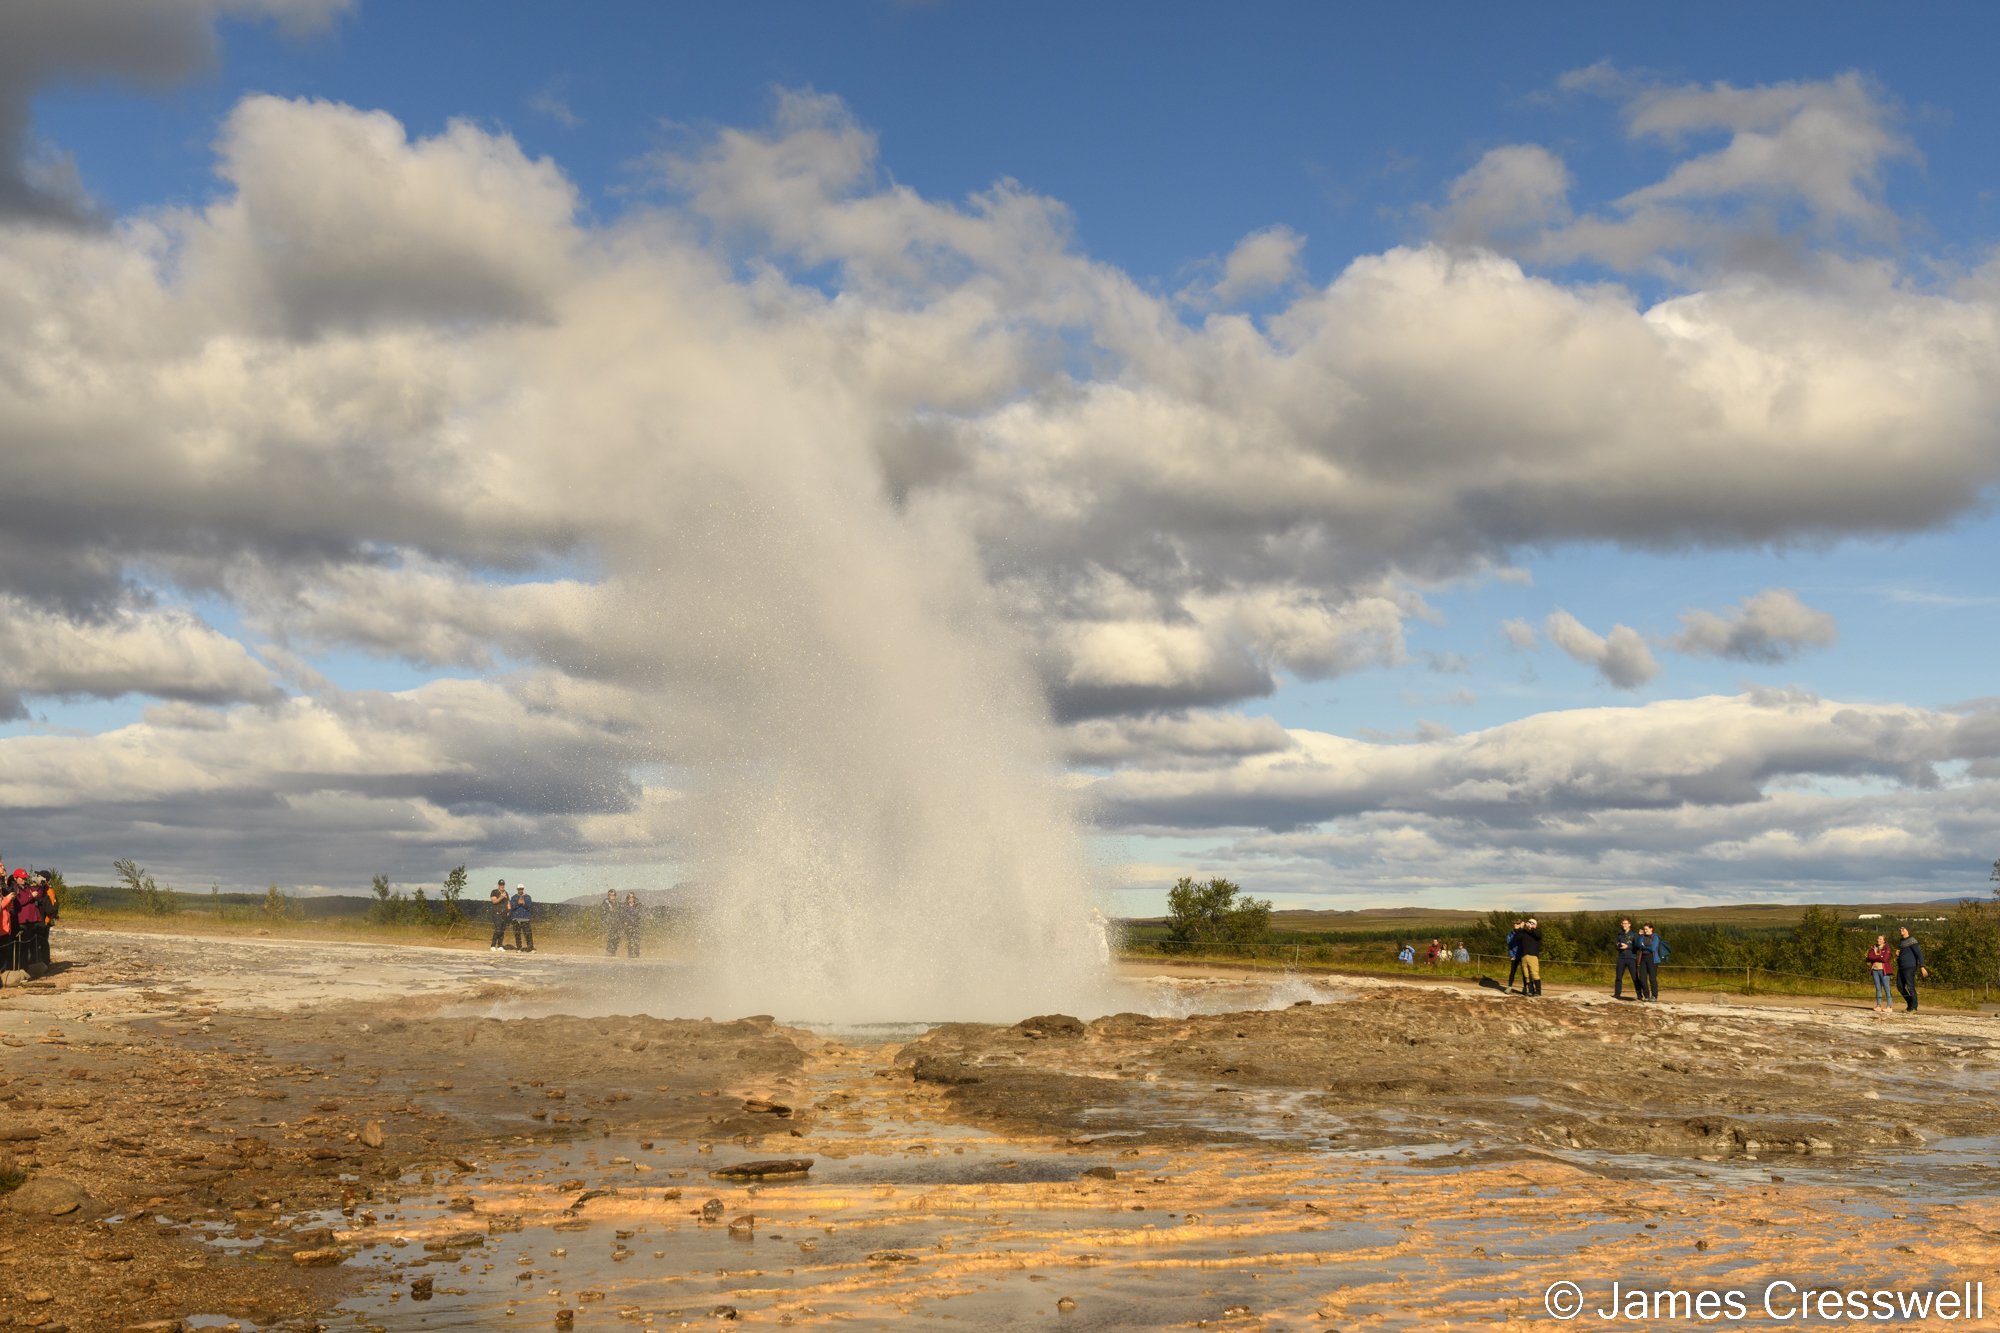 A geyser spewing out water